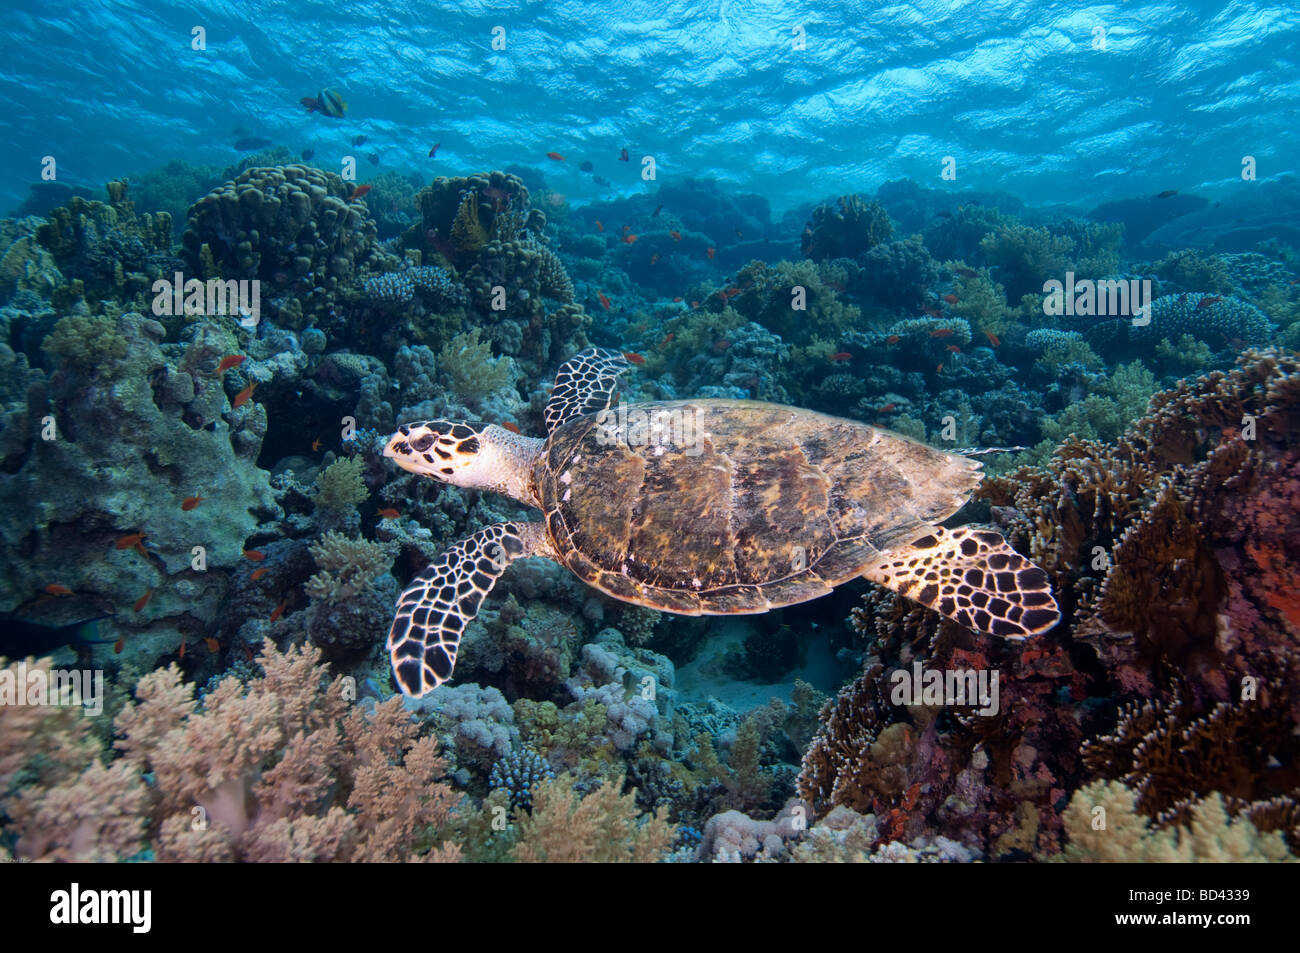 A Hawksbill turtle glides over the coral reef. Stock Photo